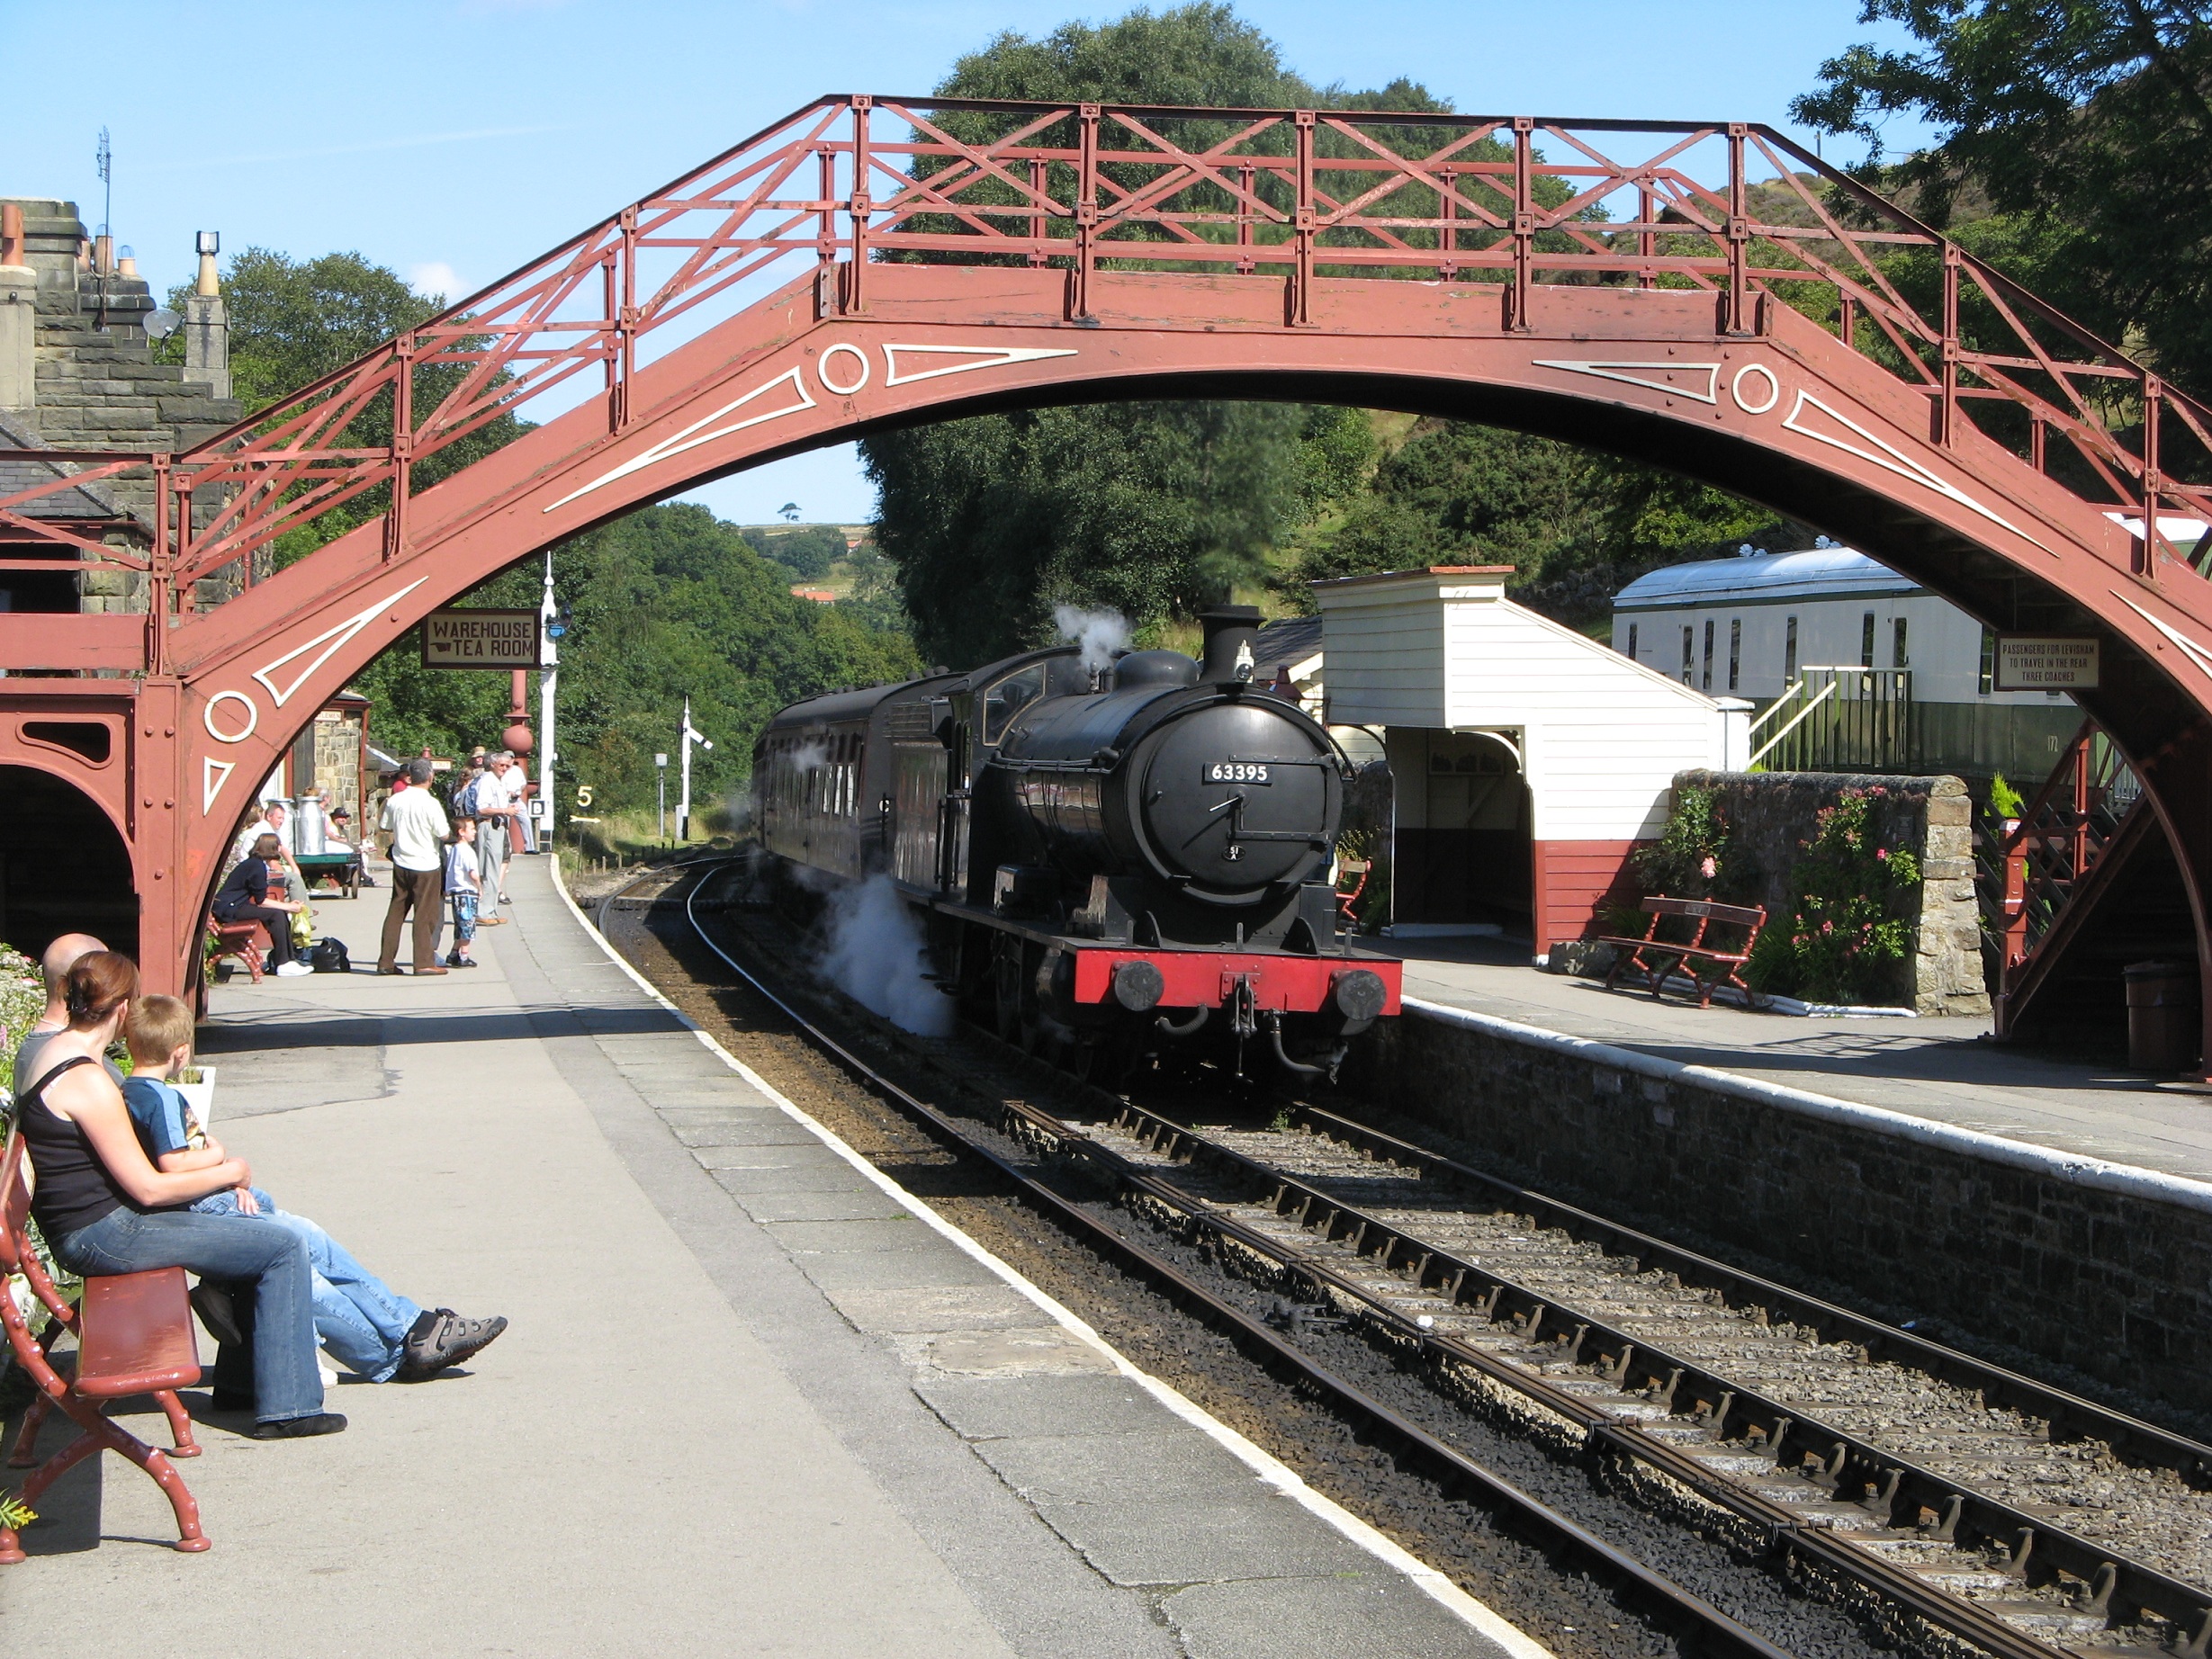 Back to the 70’s with Moors Railway